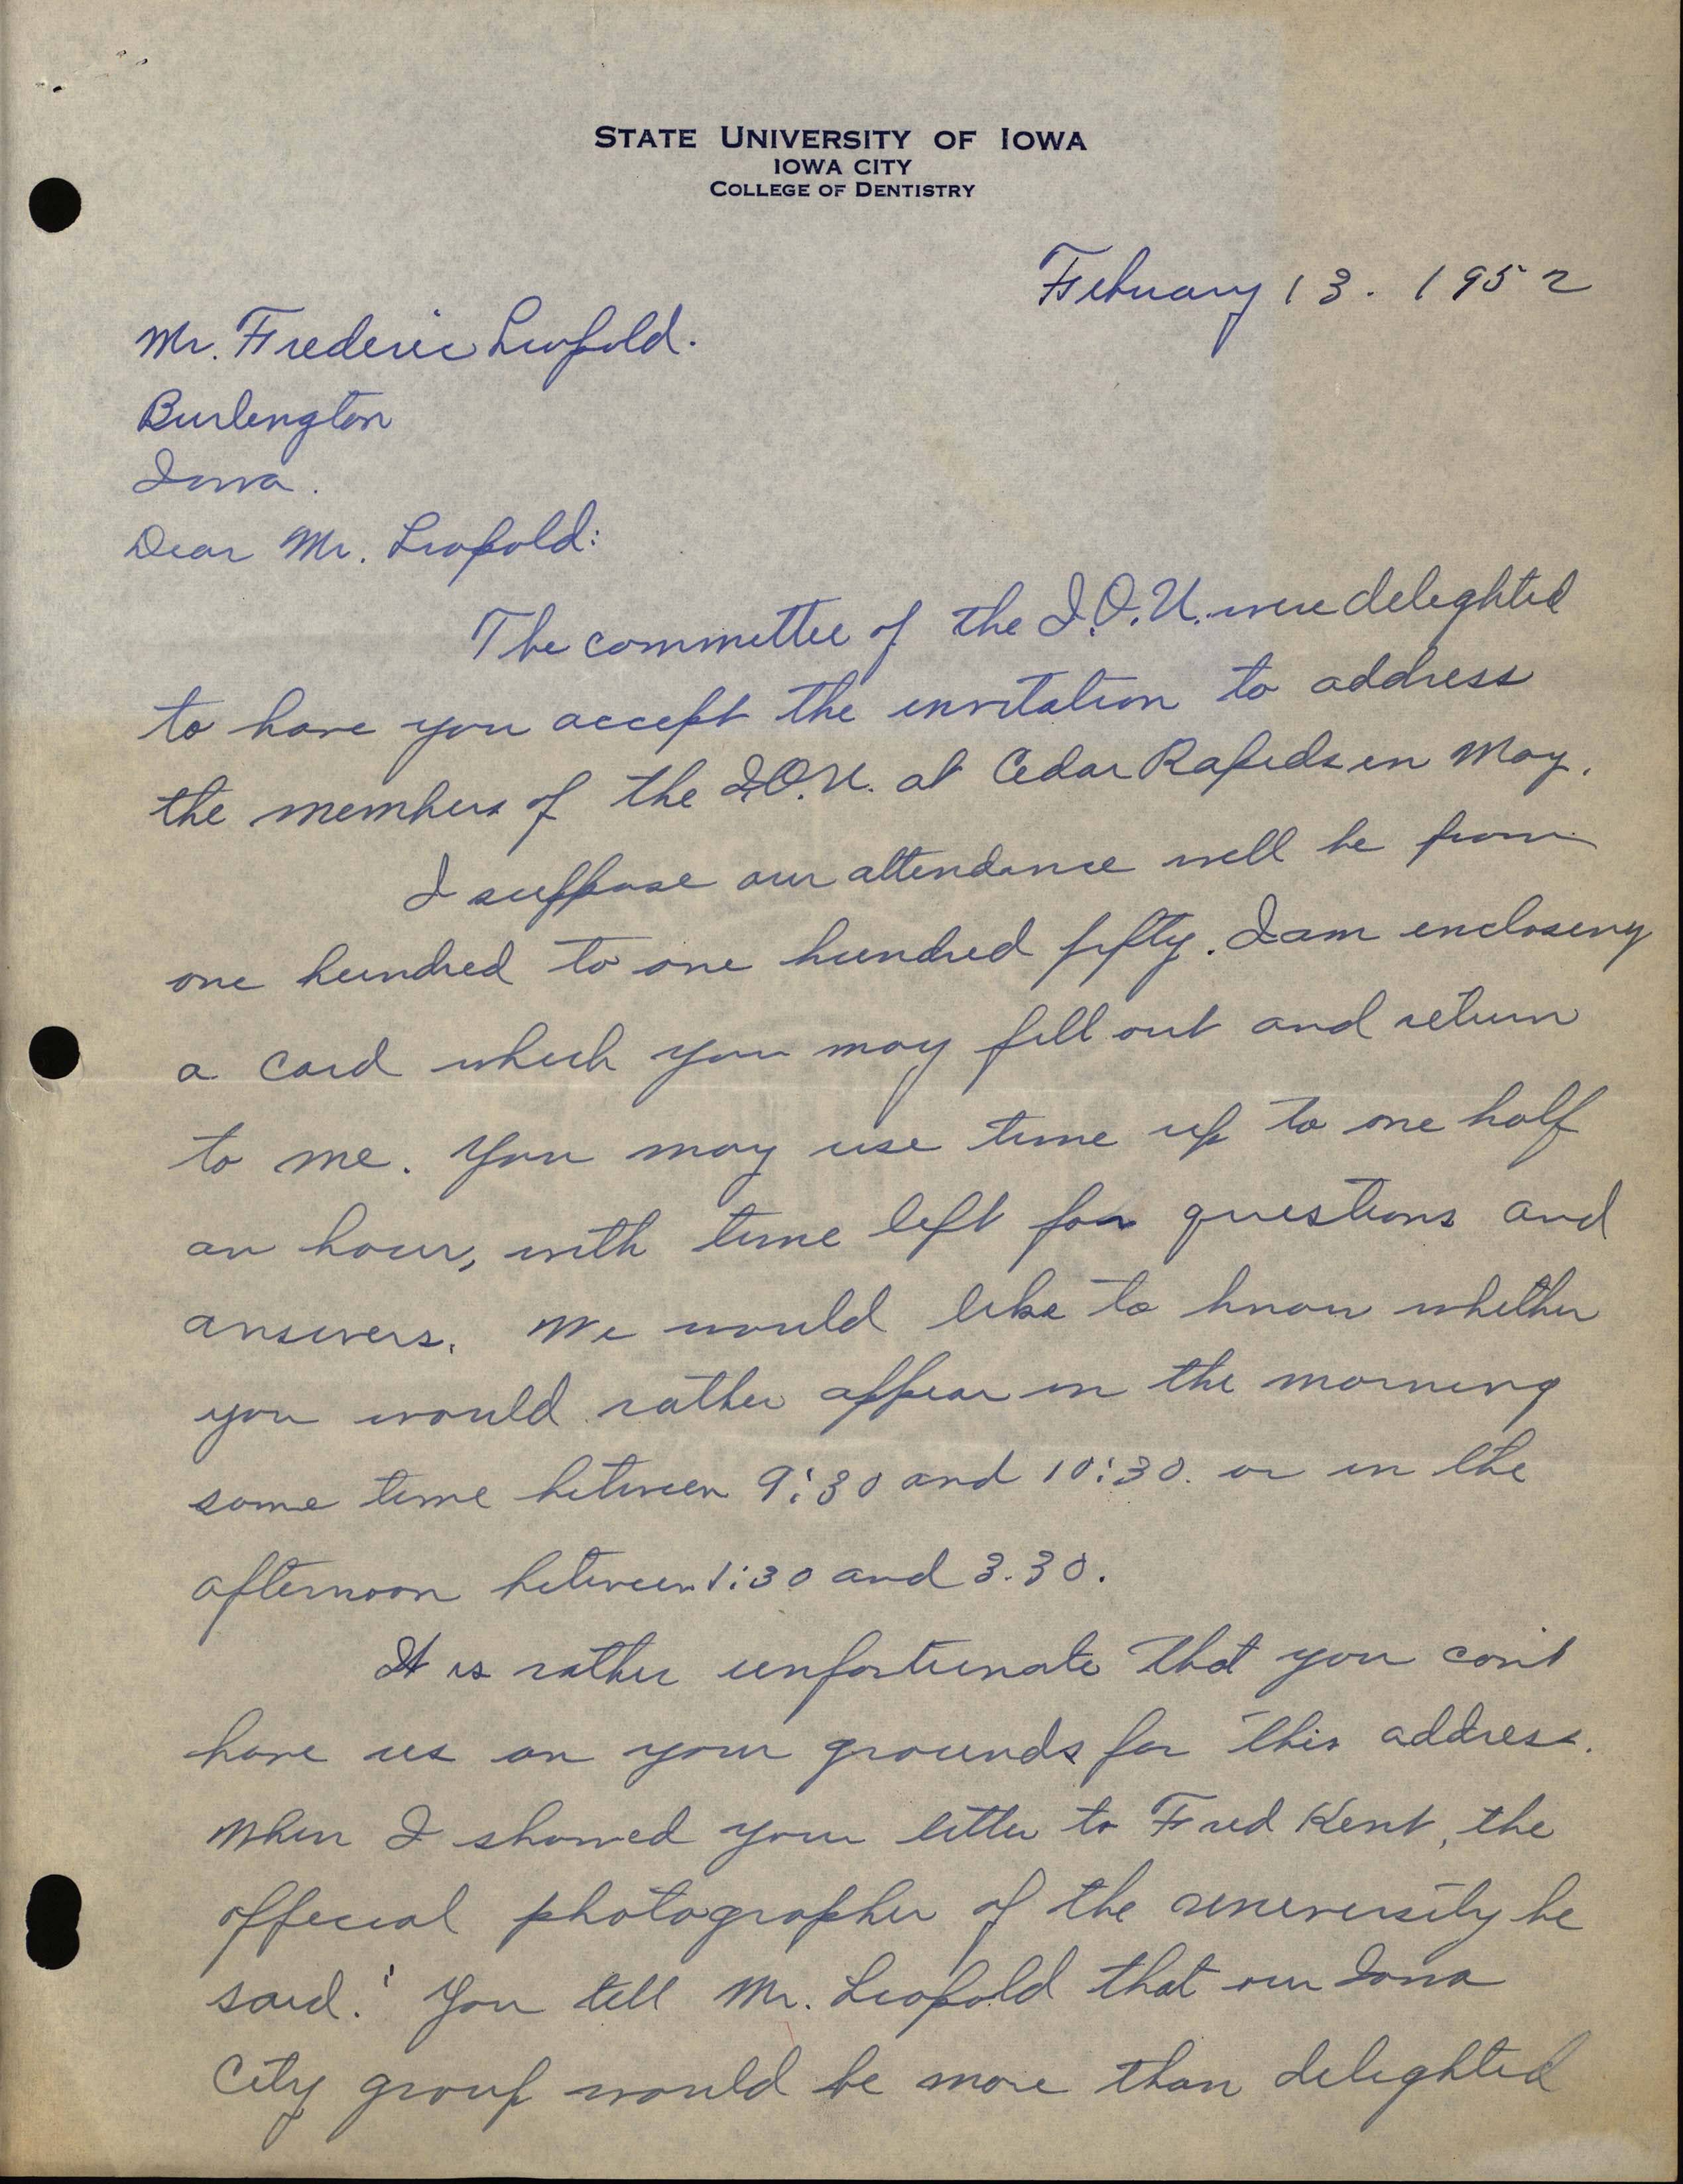 Peter P. Laude letter to Frederic Leopold regarding the acceptance of the invitation to speak at the Iowa Ornithologists' Union convention, February 13, 1952